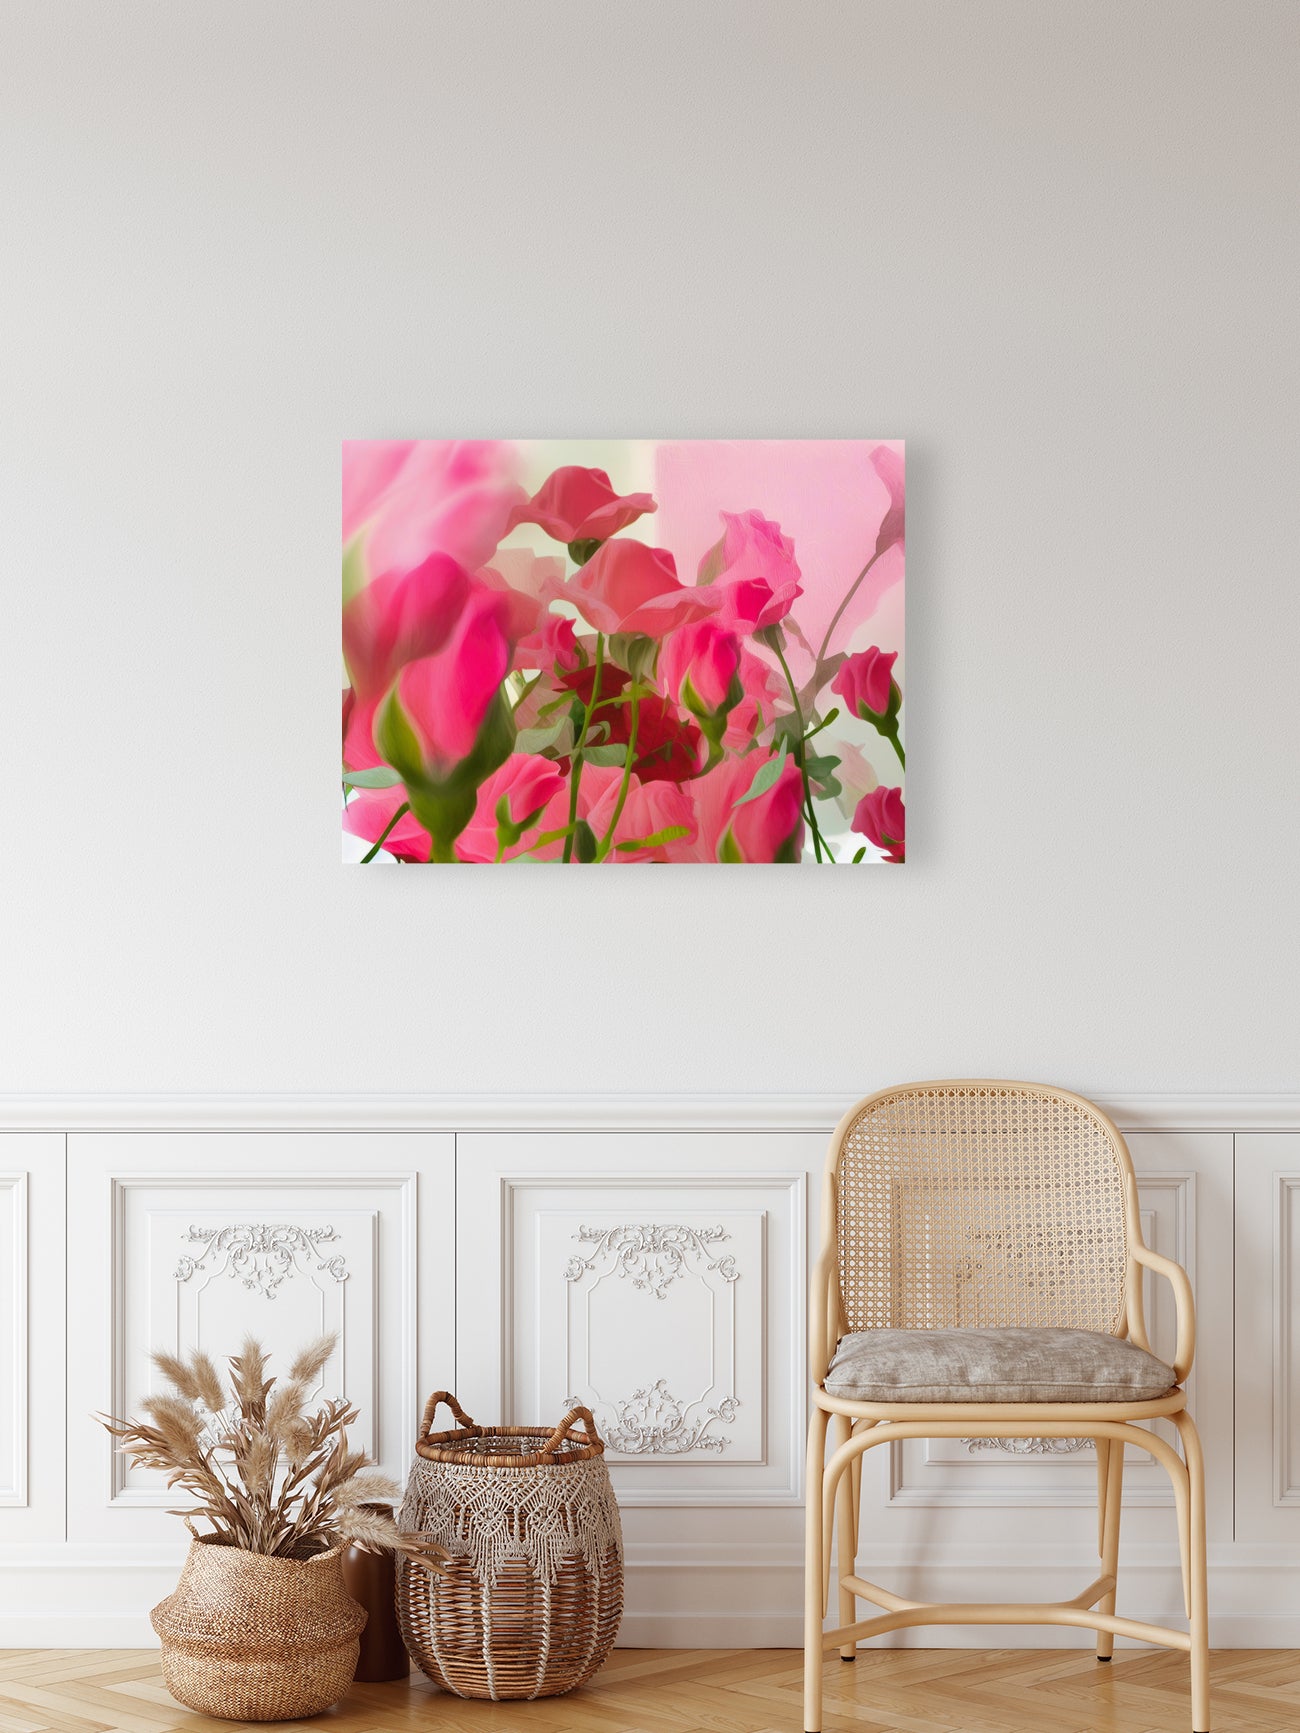 Blushing Love: A Bouquet of Pink and Red Roses by Le Boulanger - Giclée Stretched Canvas Print